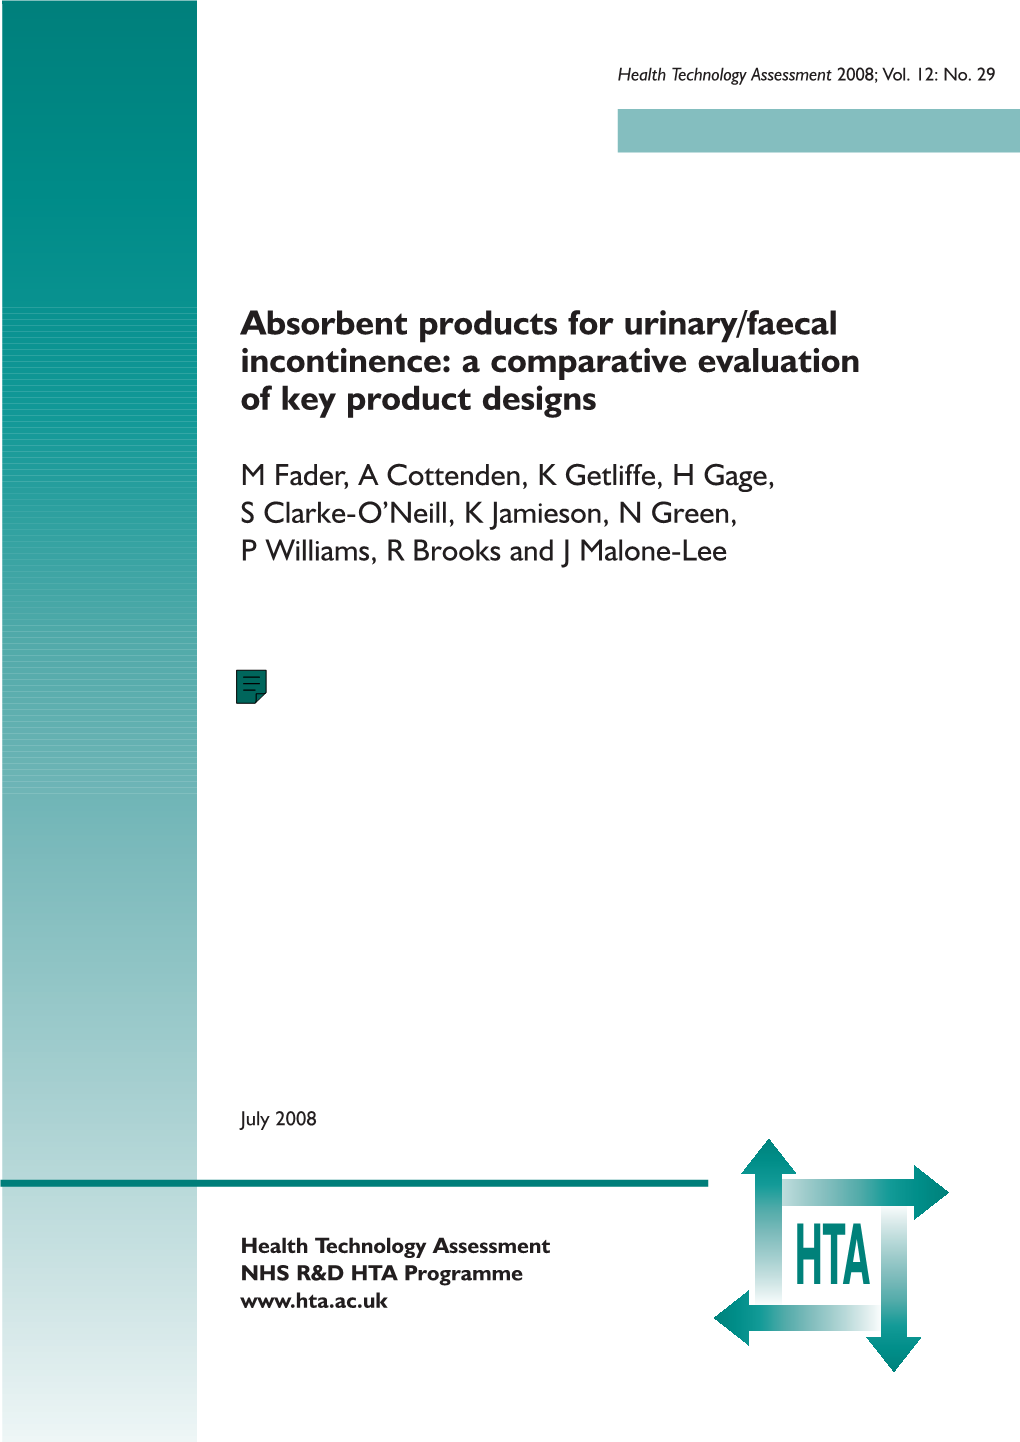 Absorbent Products for Urinary/Faecal Incontinence: a Comparative Evaluation of Key Product Designs